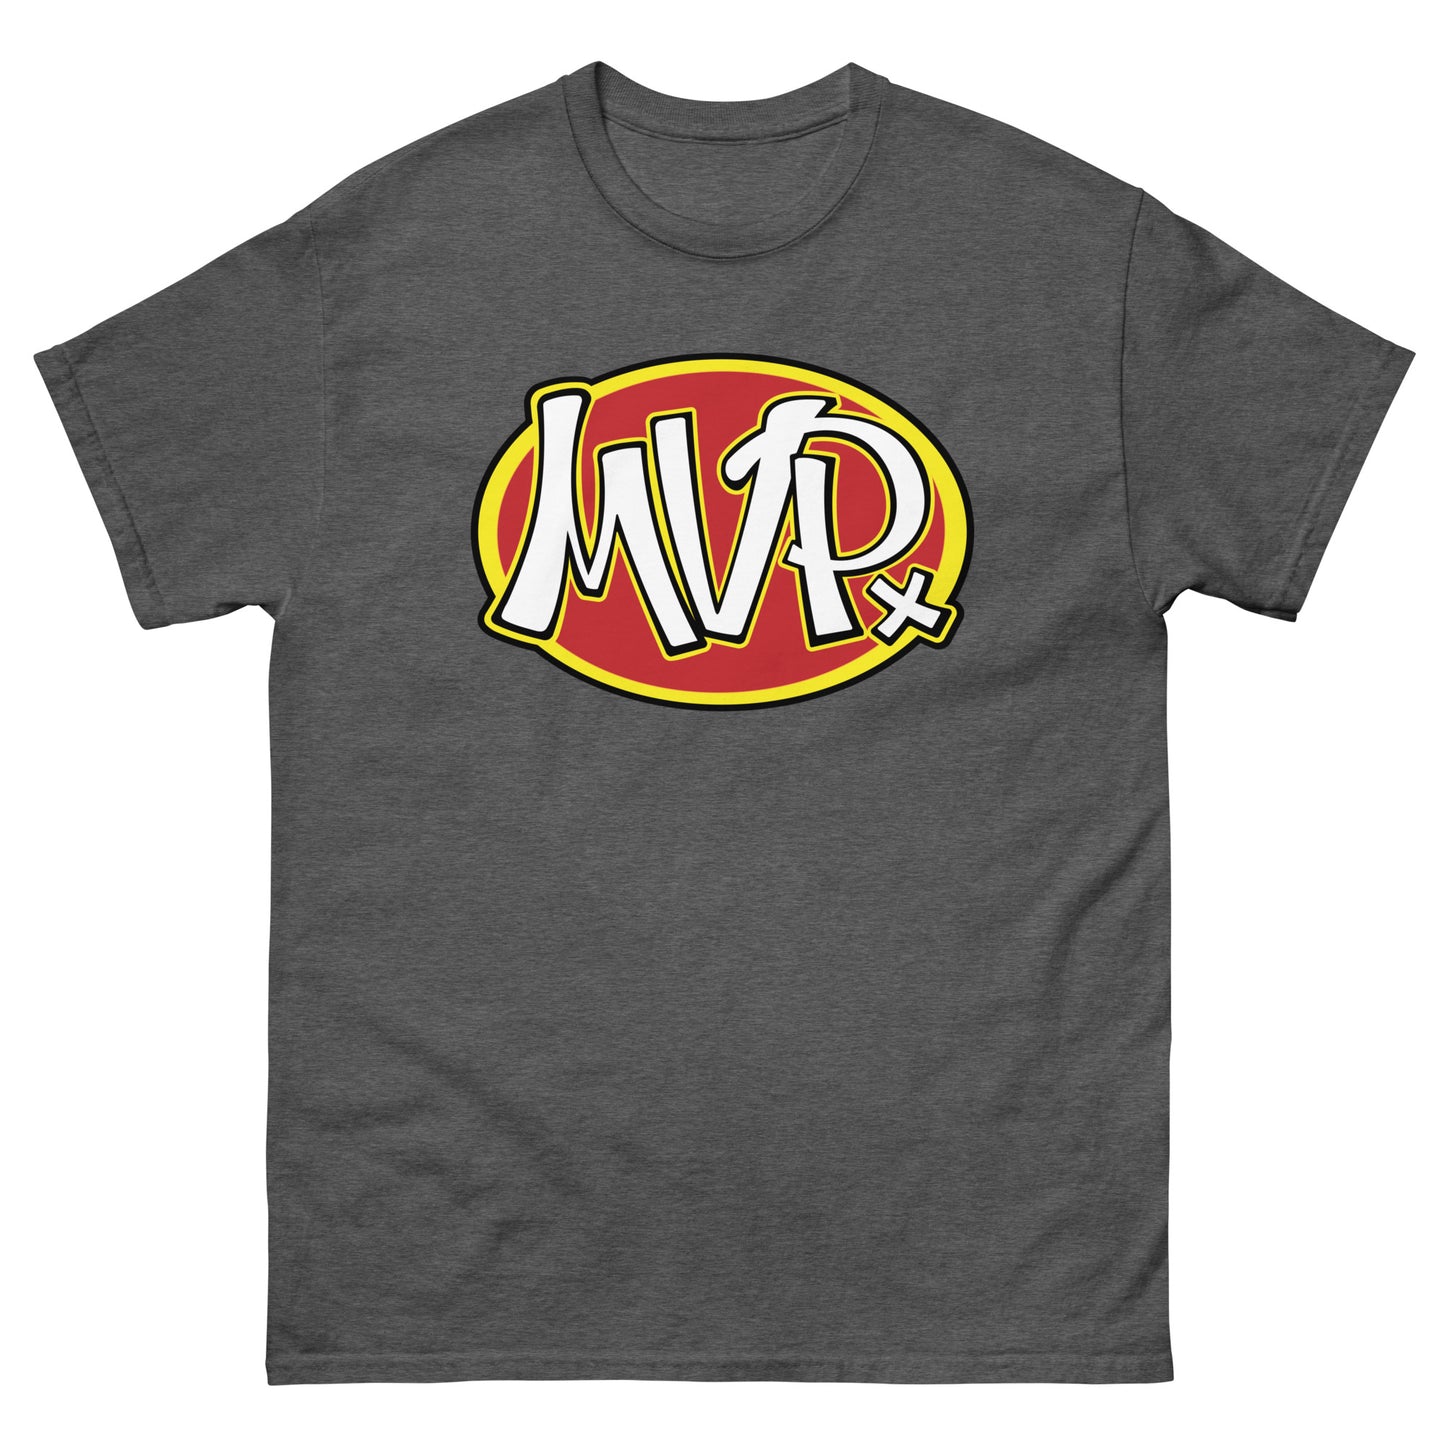 MVP (Most Valuable Player) - Men's classic tee